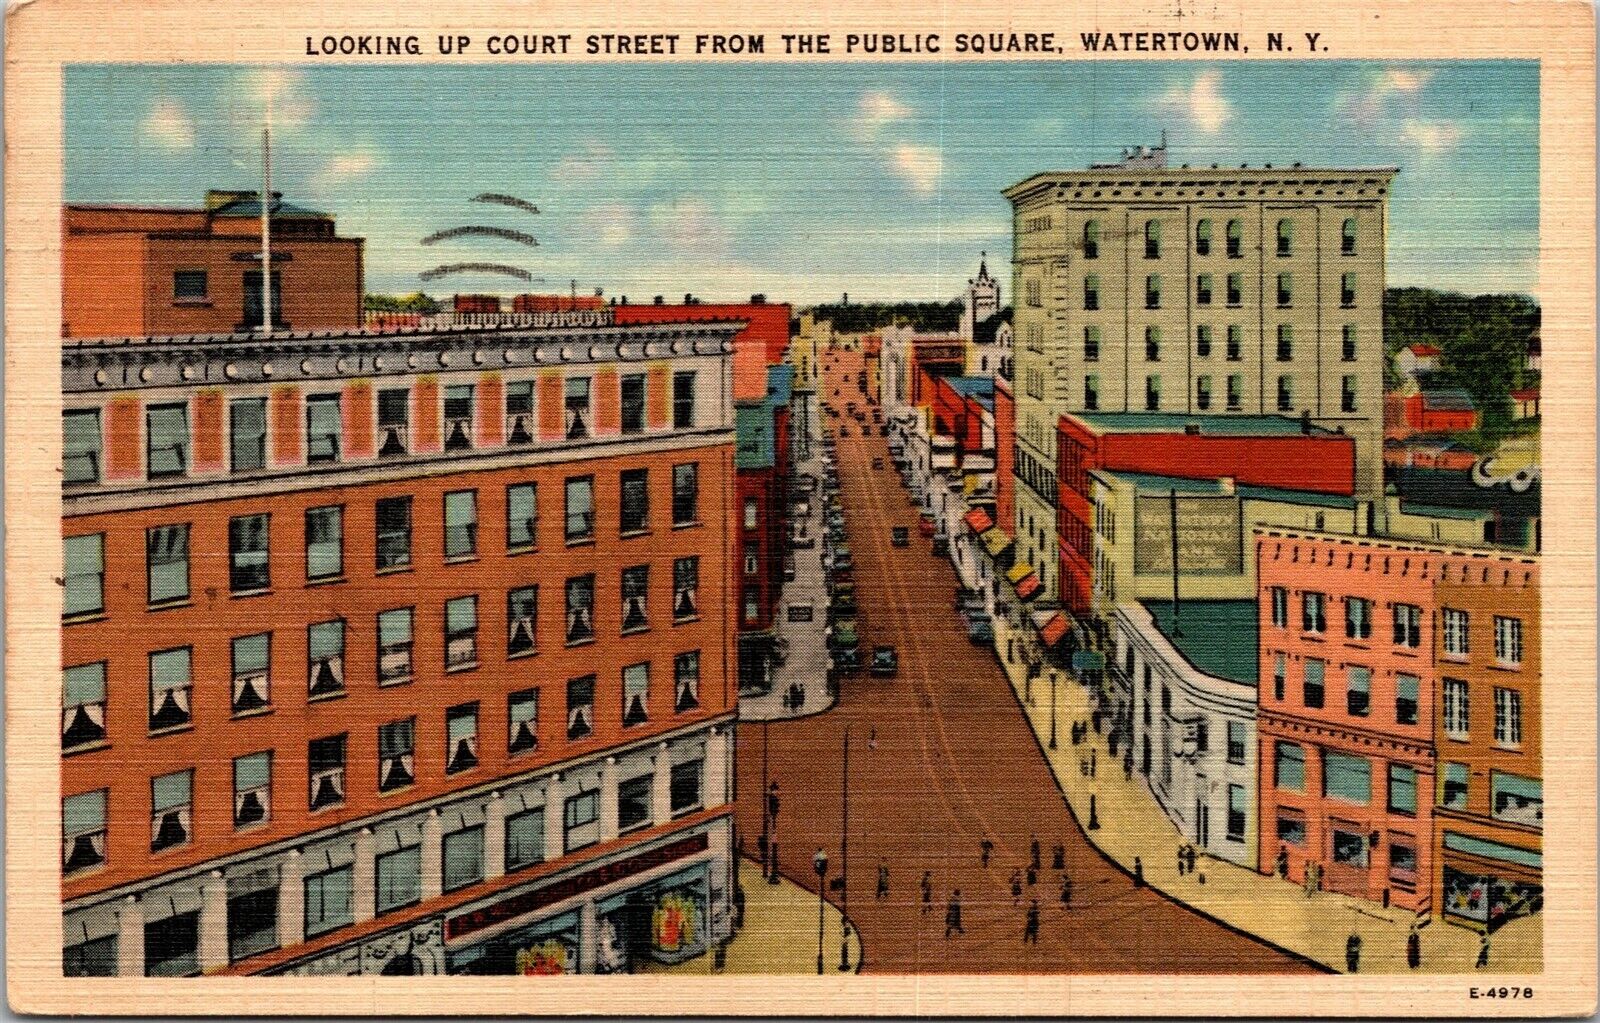 Vtg Watertown NY Looking Up Court Street from Public Square 1940s Postcard